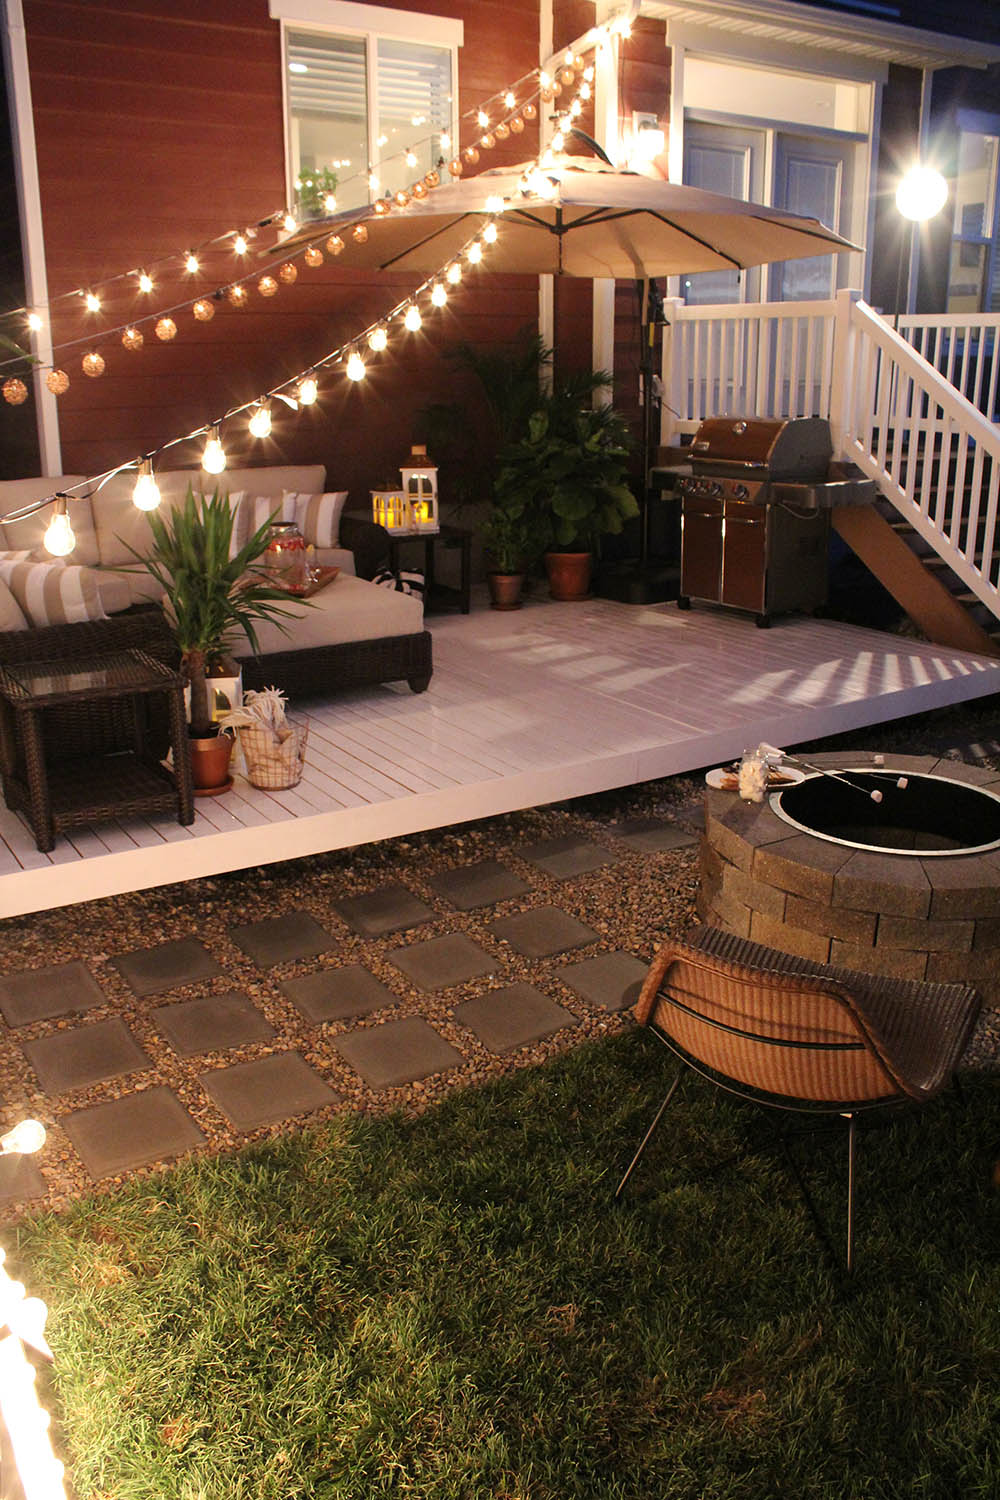 How to Build a Simple DIY Deck on a Budget